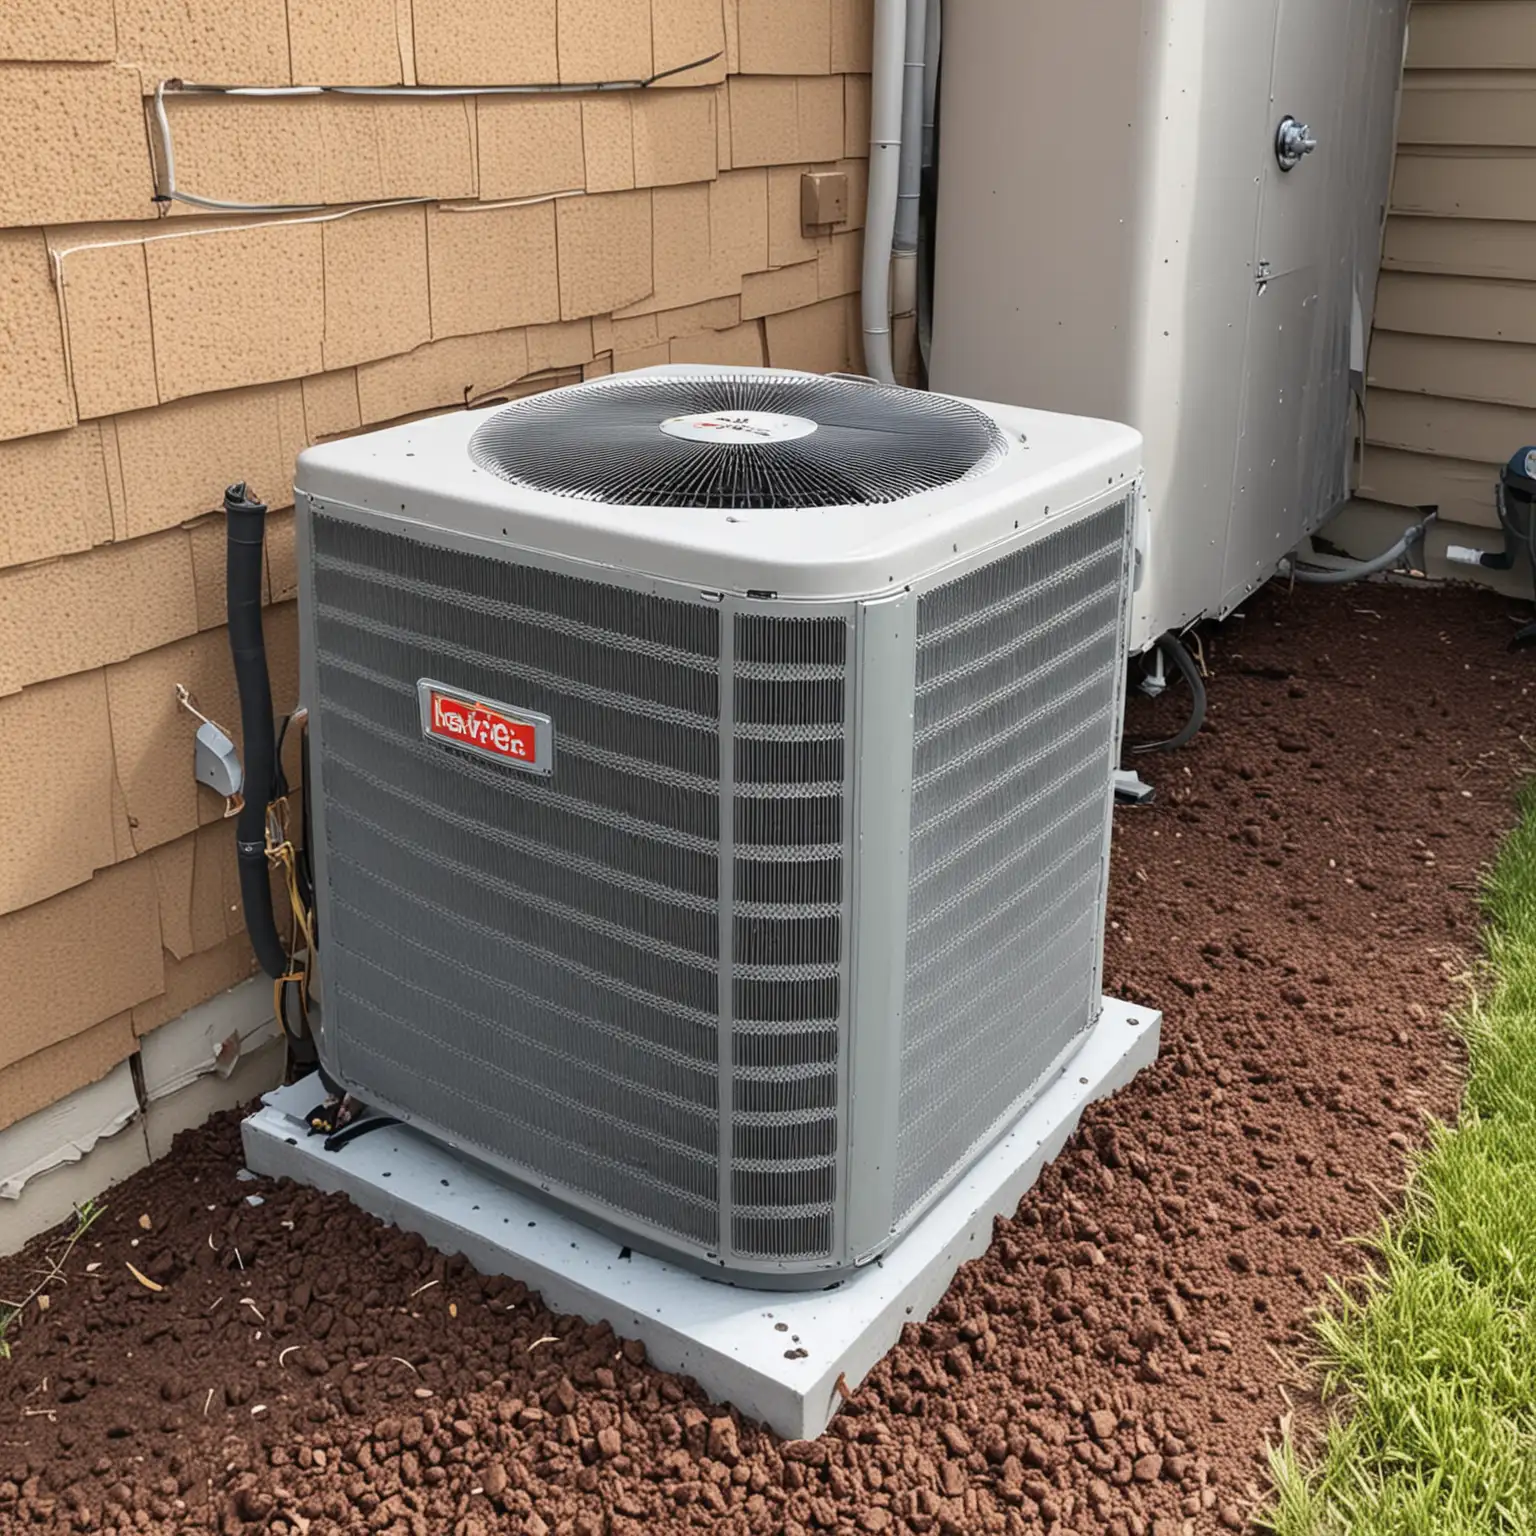 Show a photo of an HVAC unit located outside a persons home in georgia